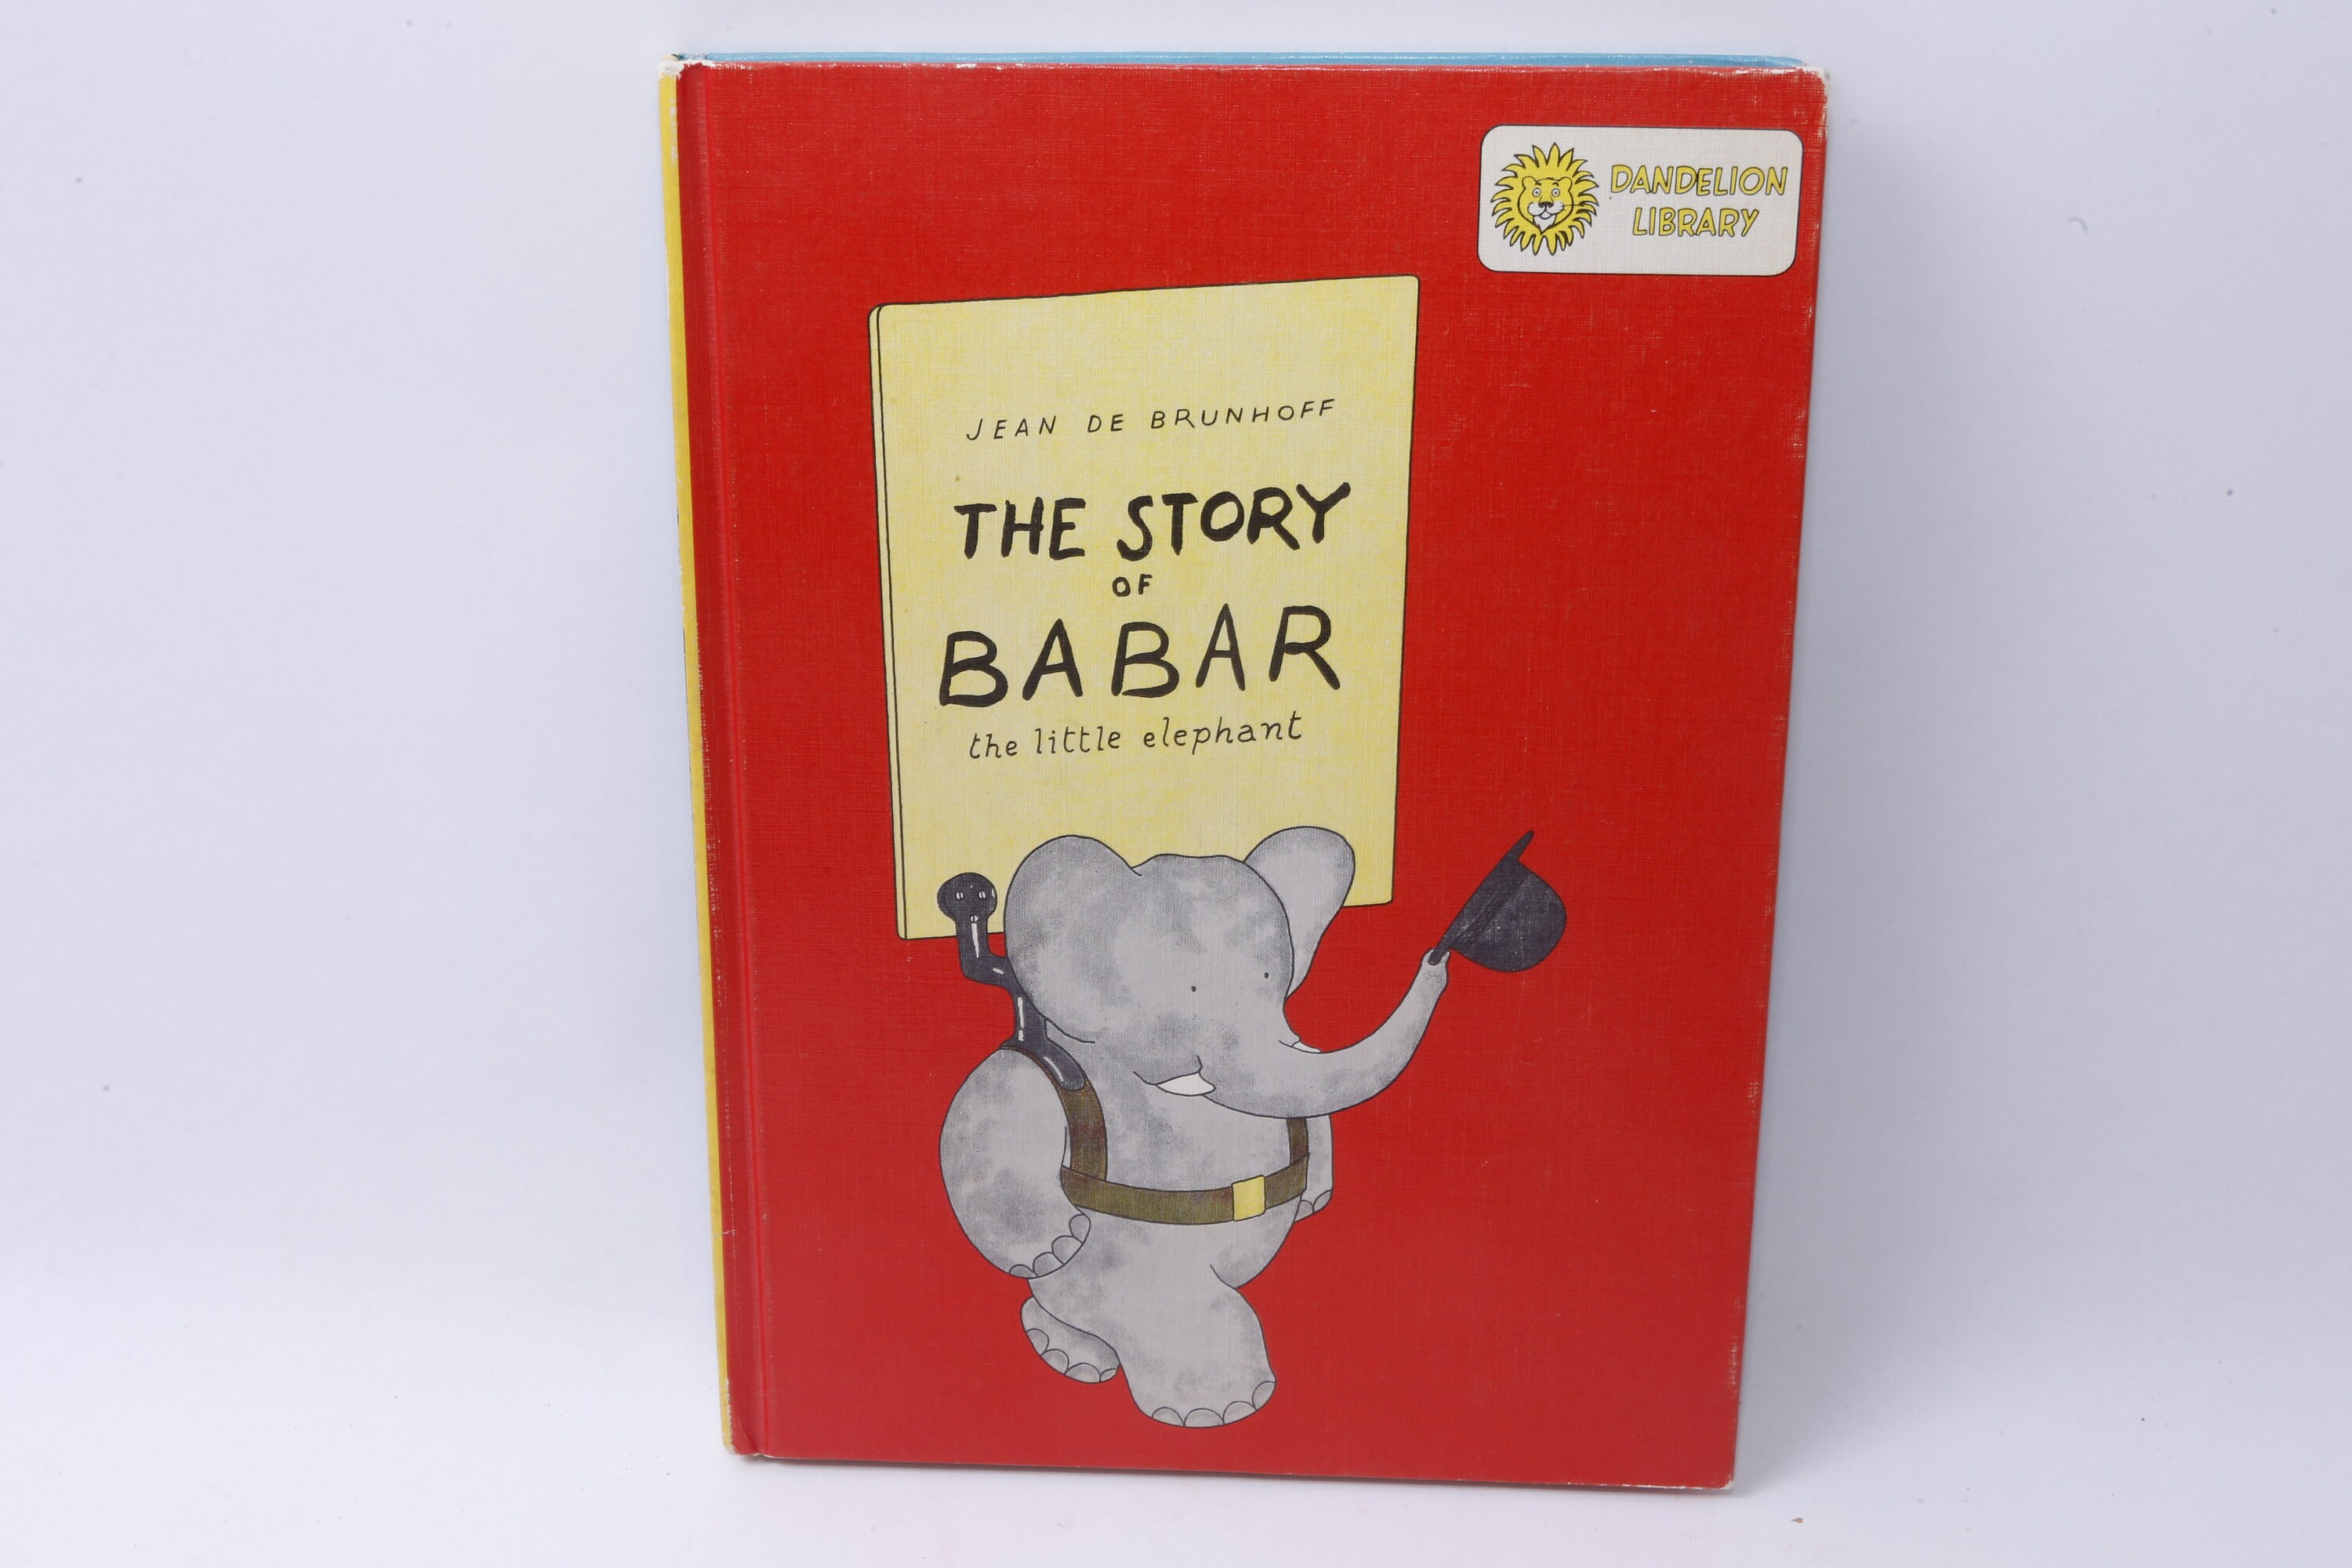 Story　Elephant　the　of　India　Babar　Little　in　Etsy　Jean　De　Brunhoff　Online　Buy　The